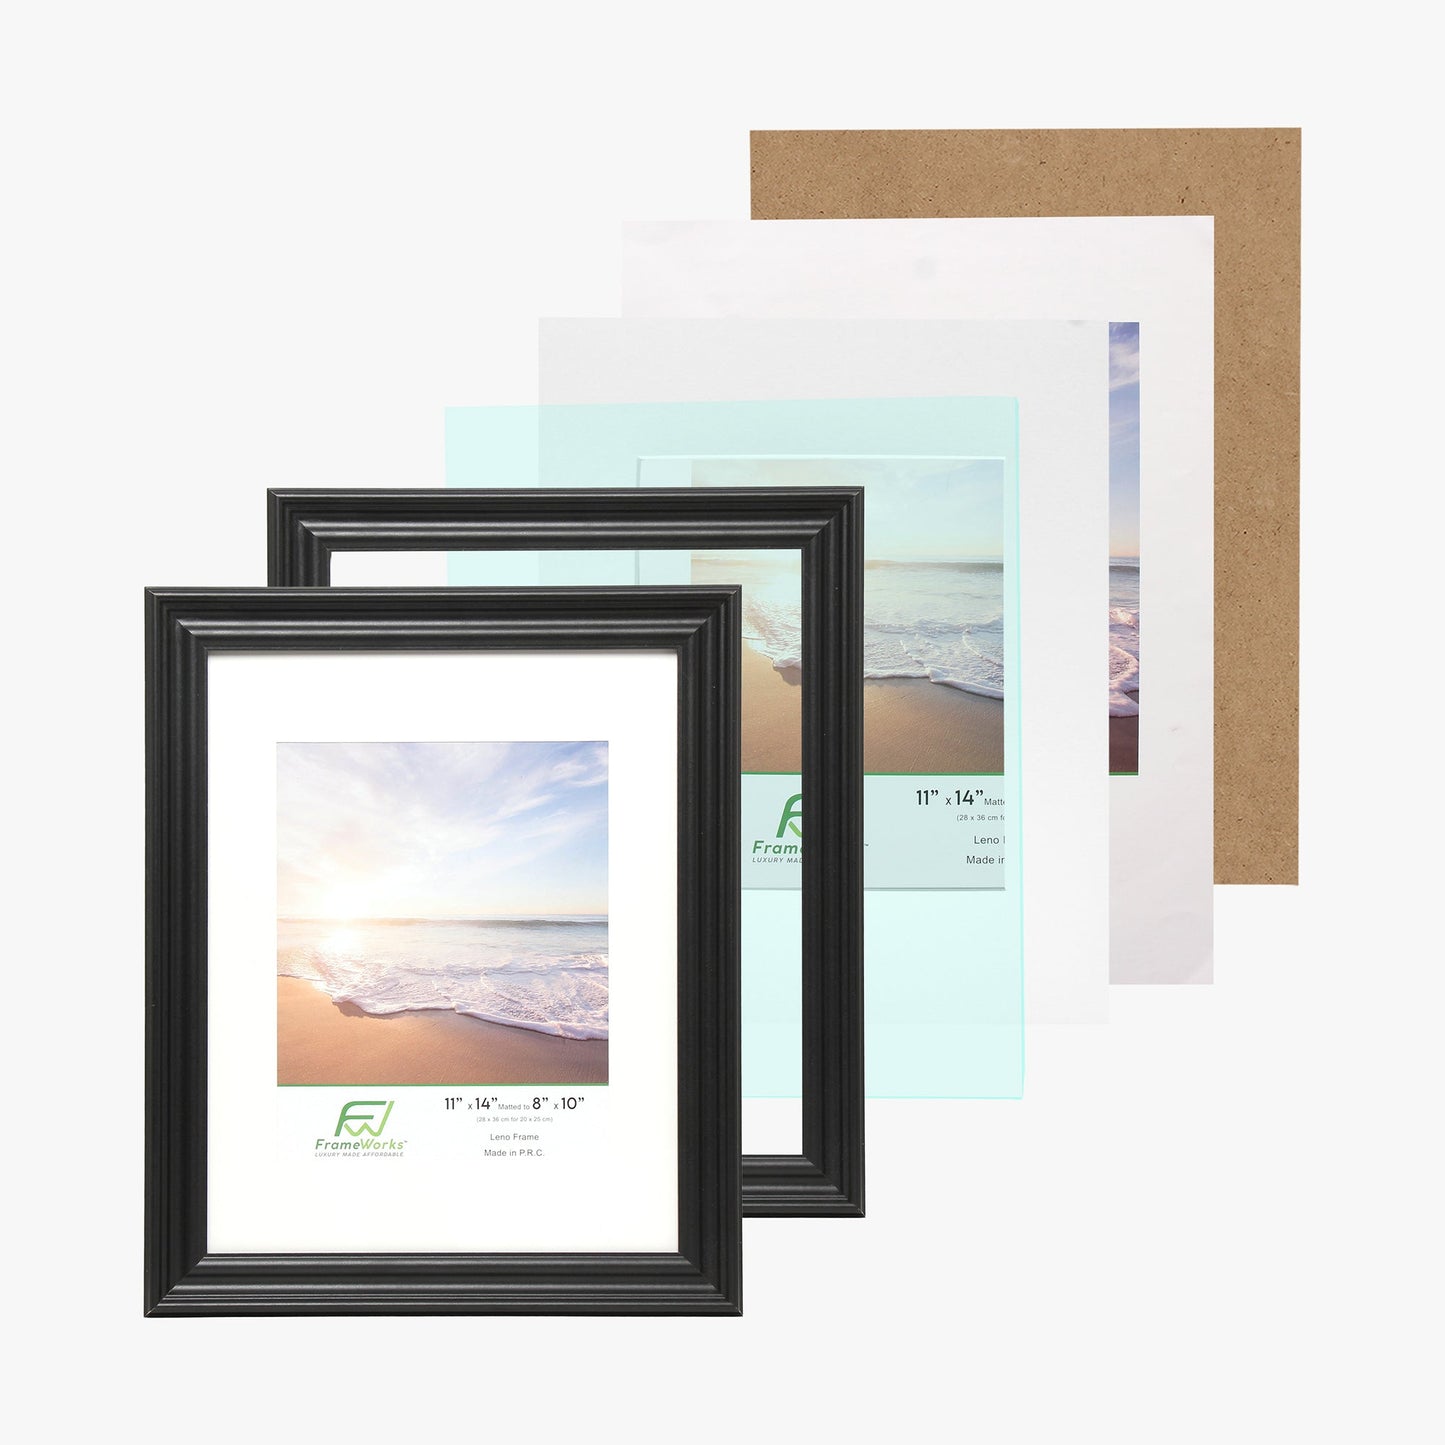 11" x 14" Black Wood 2-Pack Picture Frames with Molded Edges, 8" x 10" Matted